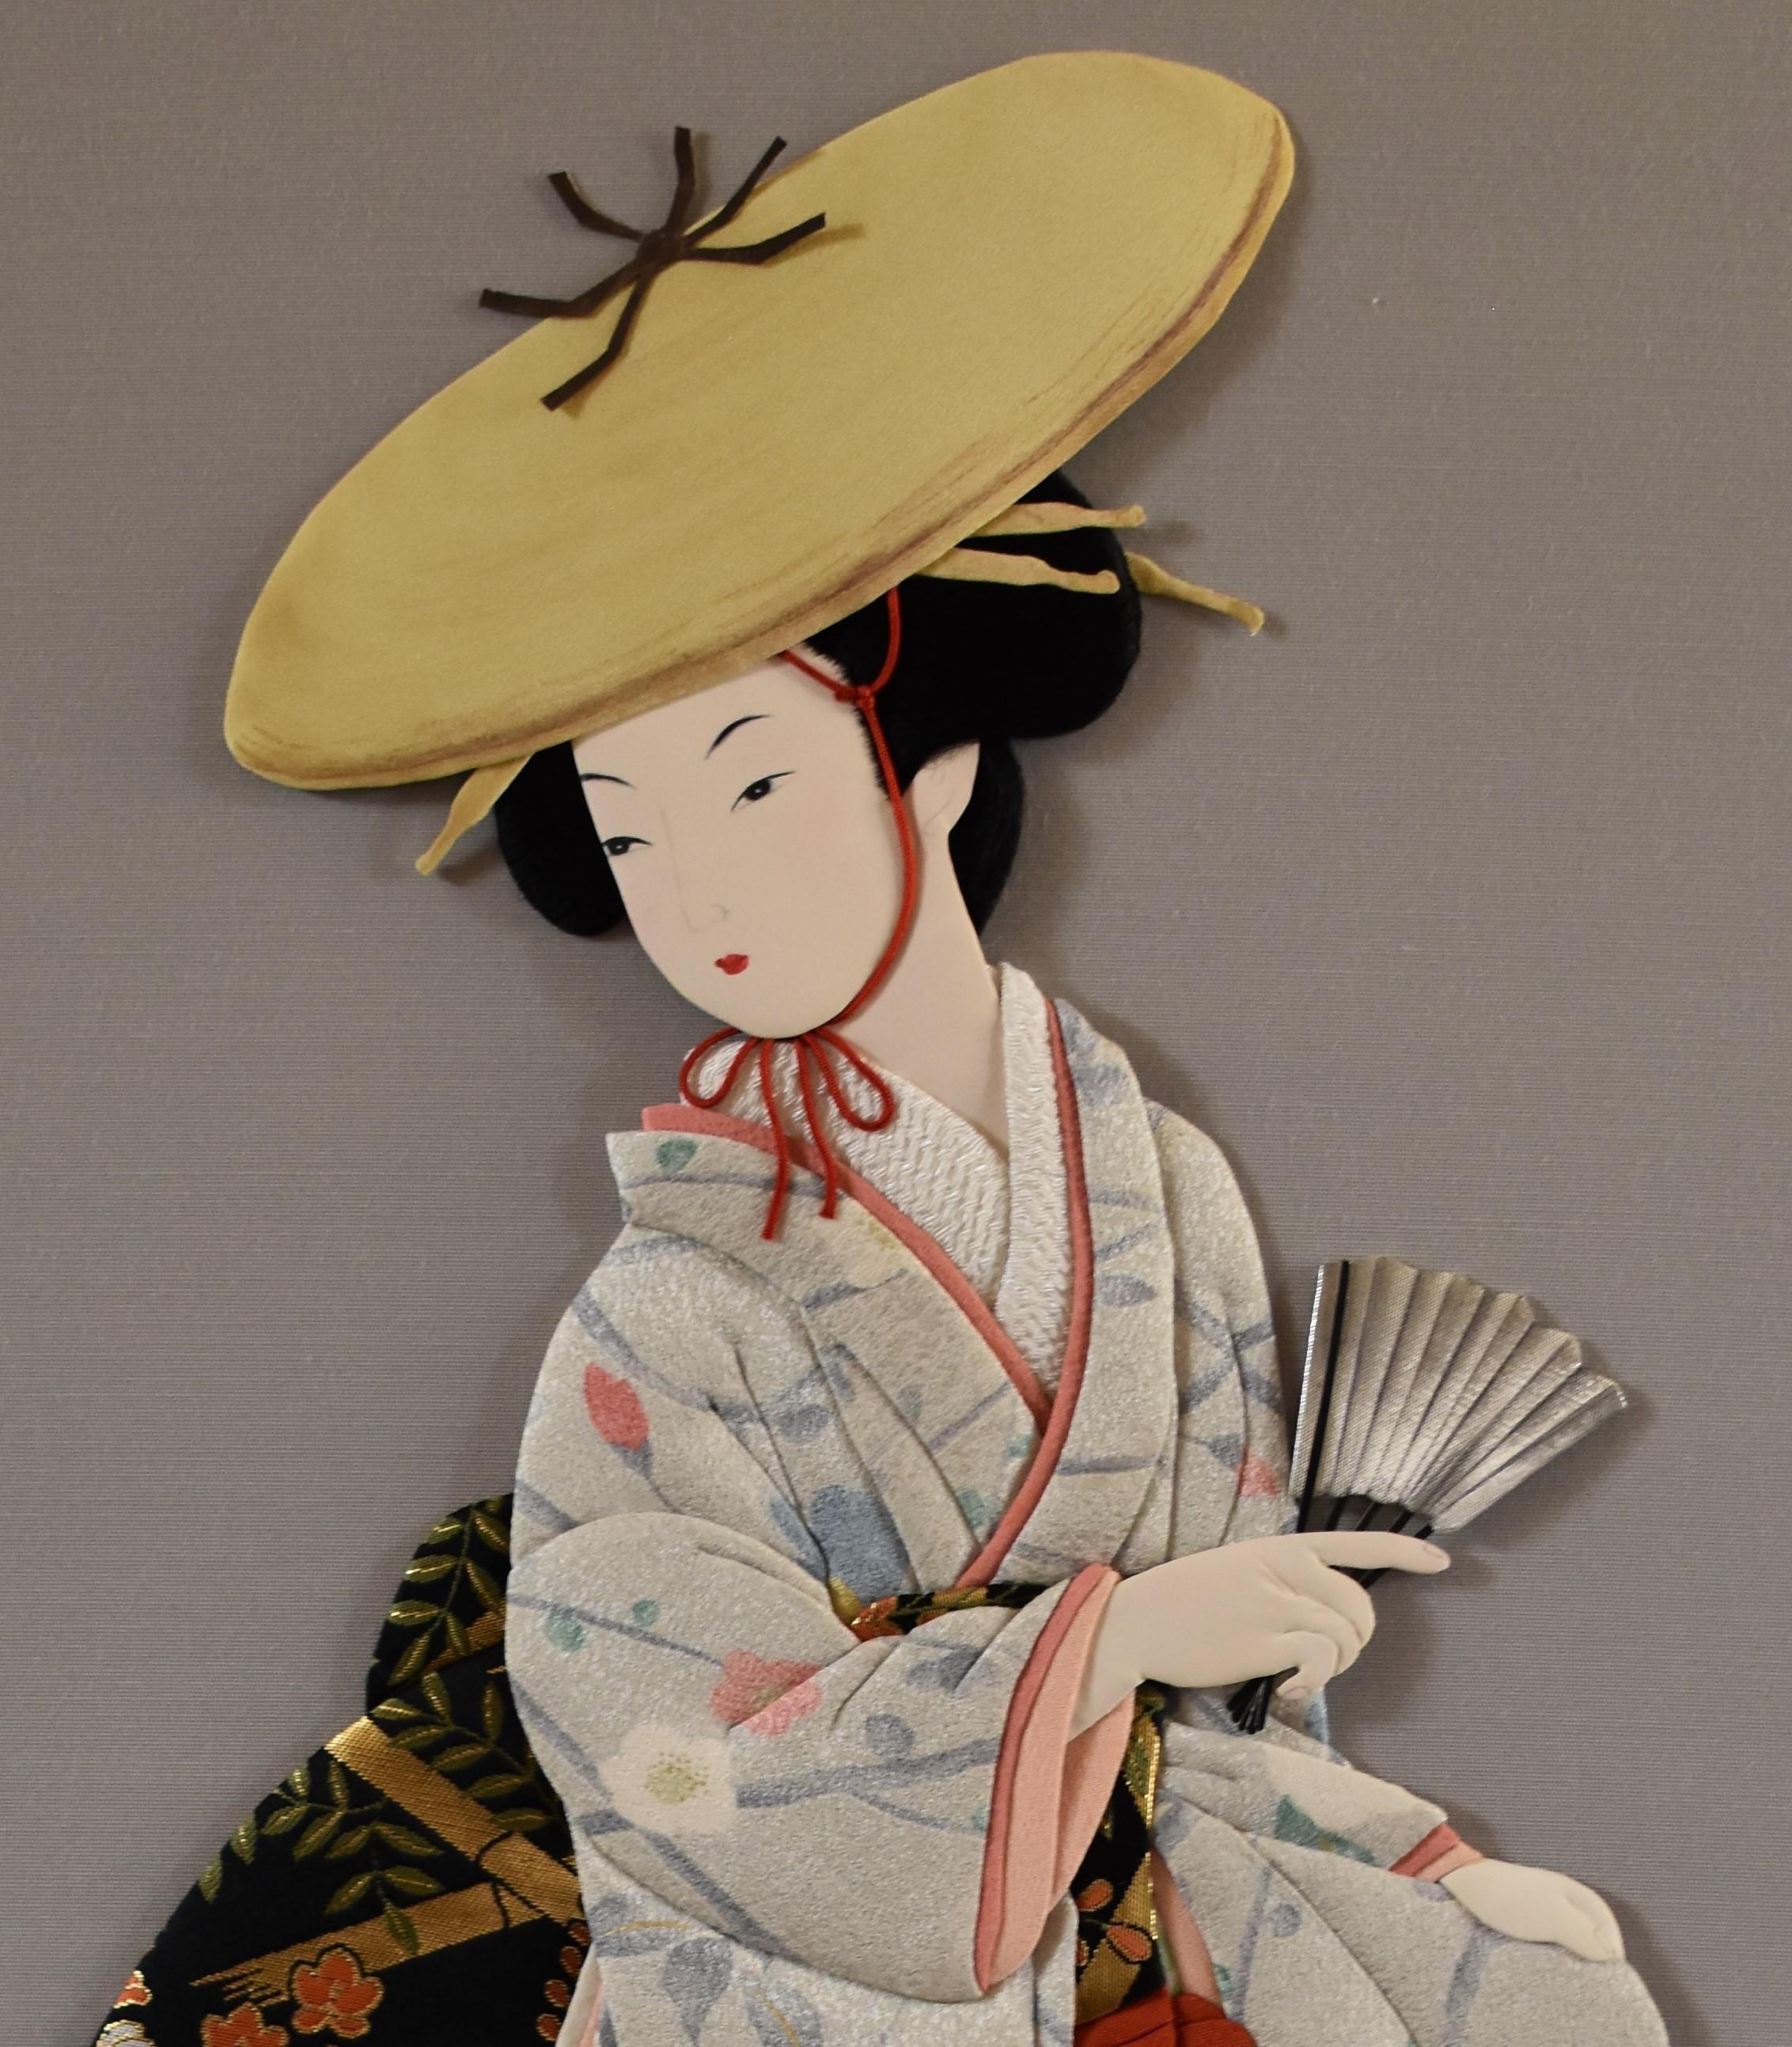 Exquisite Japanese contemporary Oshie traditional handcrafted silk and brocade Wall decorative art piece with a three-dimensional effect depicting a fascinating scene of a dancer elegantly performing what is called 